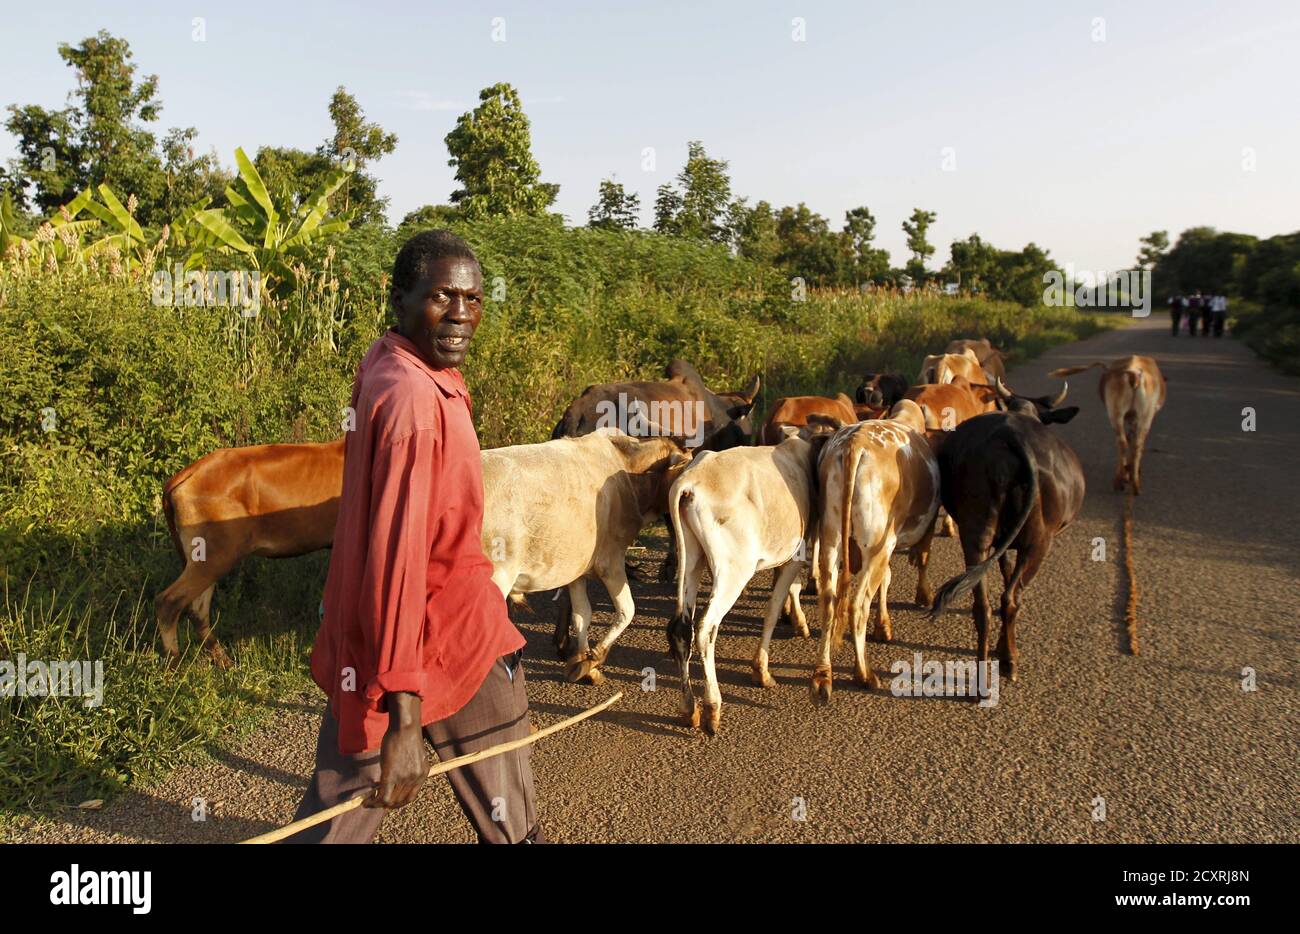 Timothy Adede, a 50-year-old herdsman and farmer, leads his cattle from a water point to his homestead in Kogelo, west of Kenya's capital Nairobi, July 14, 2015. Adede said, 'Our children are working hard in school to be like the U.S. President Barack Obama.' As U.S. President Barack Obama visits Kenya, a personal connection to his father's birthplace of Kogelo dominates a trip that Kenyans view as a native son returning home. Residents from a herdsman to a housewife share their views on what Obama has achieved and what they would like to see next. REUTERS/Thomas Mukoya  PICTURE 2 OF 13 FOR WI Stock Photo